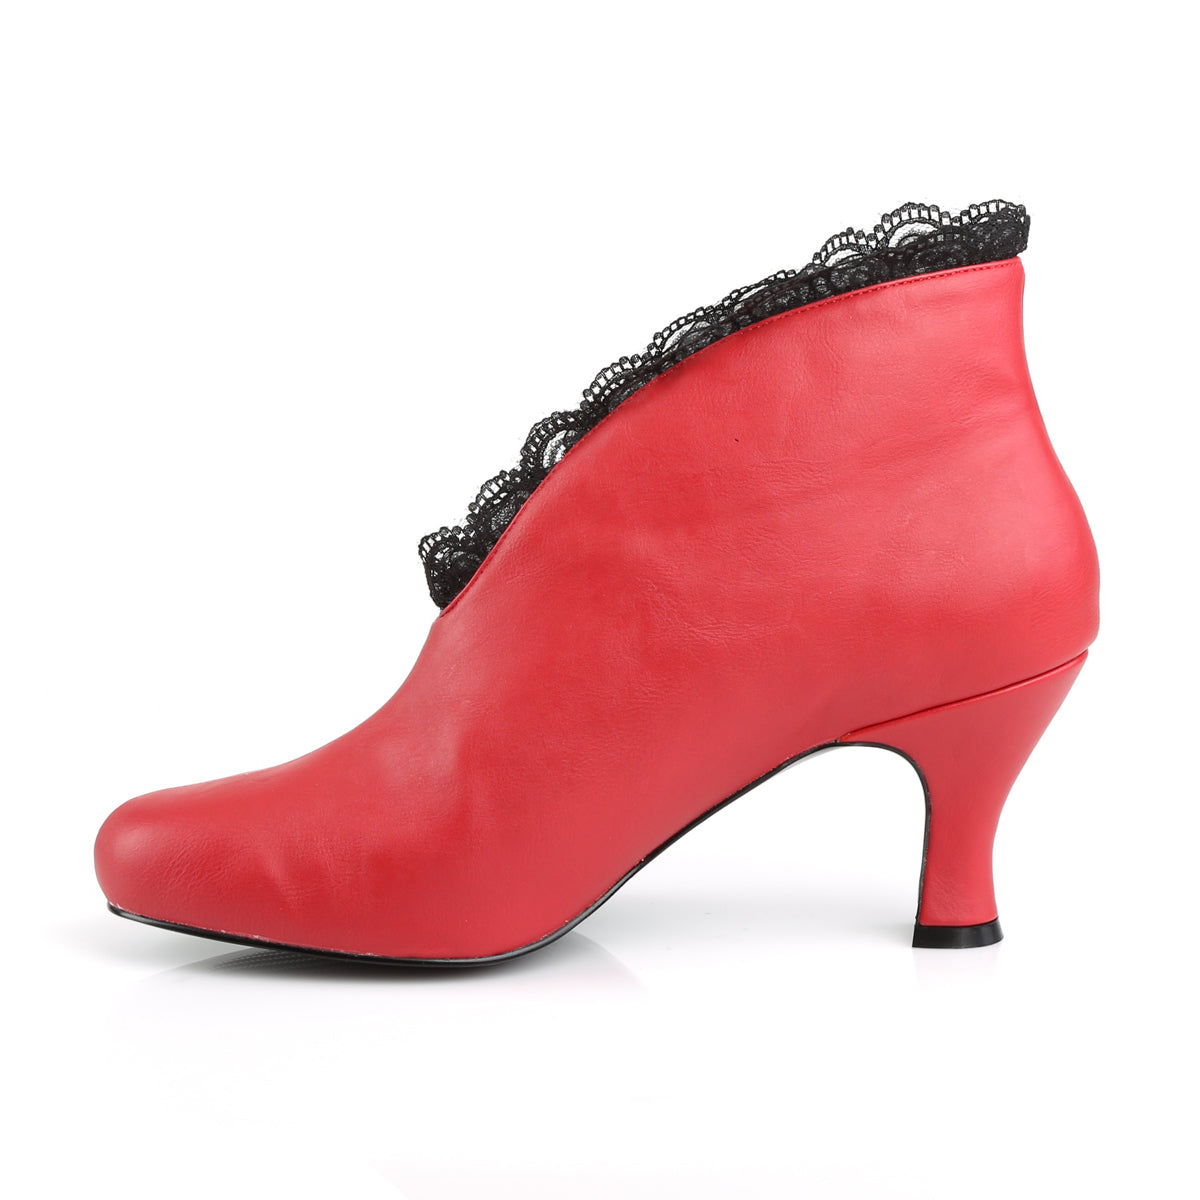 JENNA-105 Large Size Ladies Shoes Pleaser Pink Label Single Soles Red Fuax Leather-Black Lace